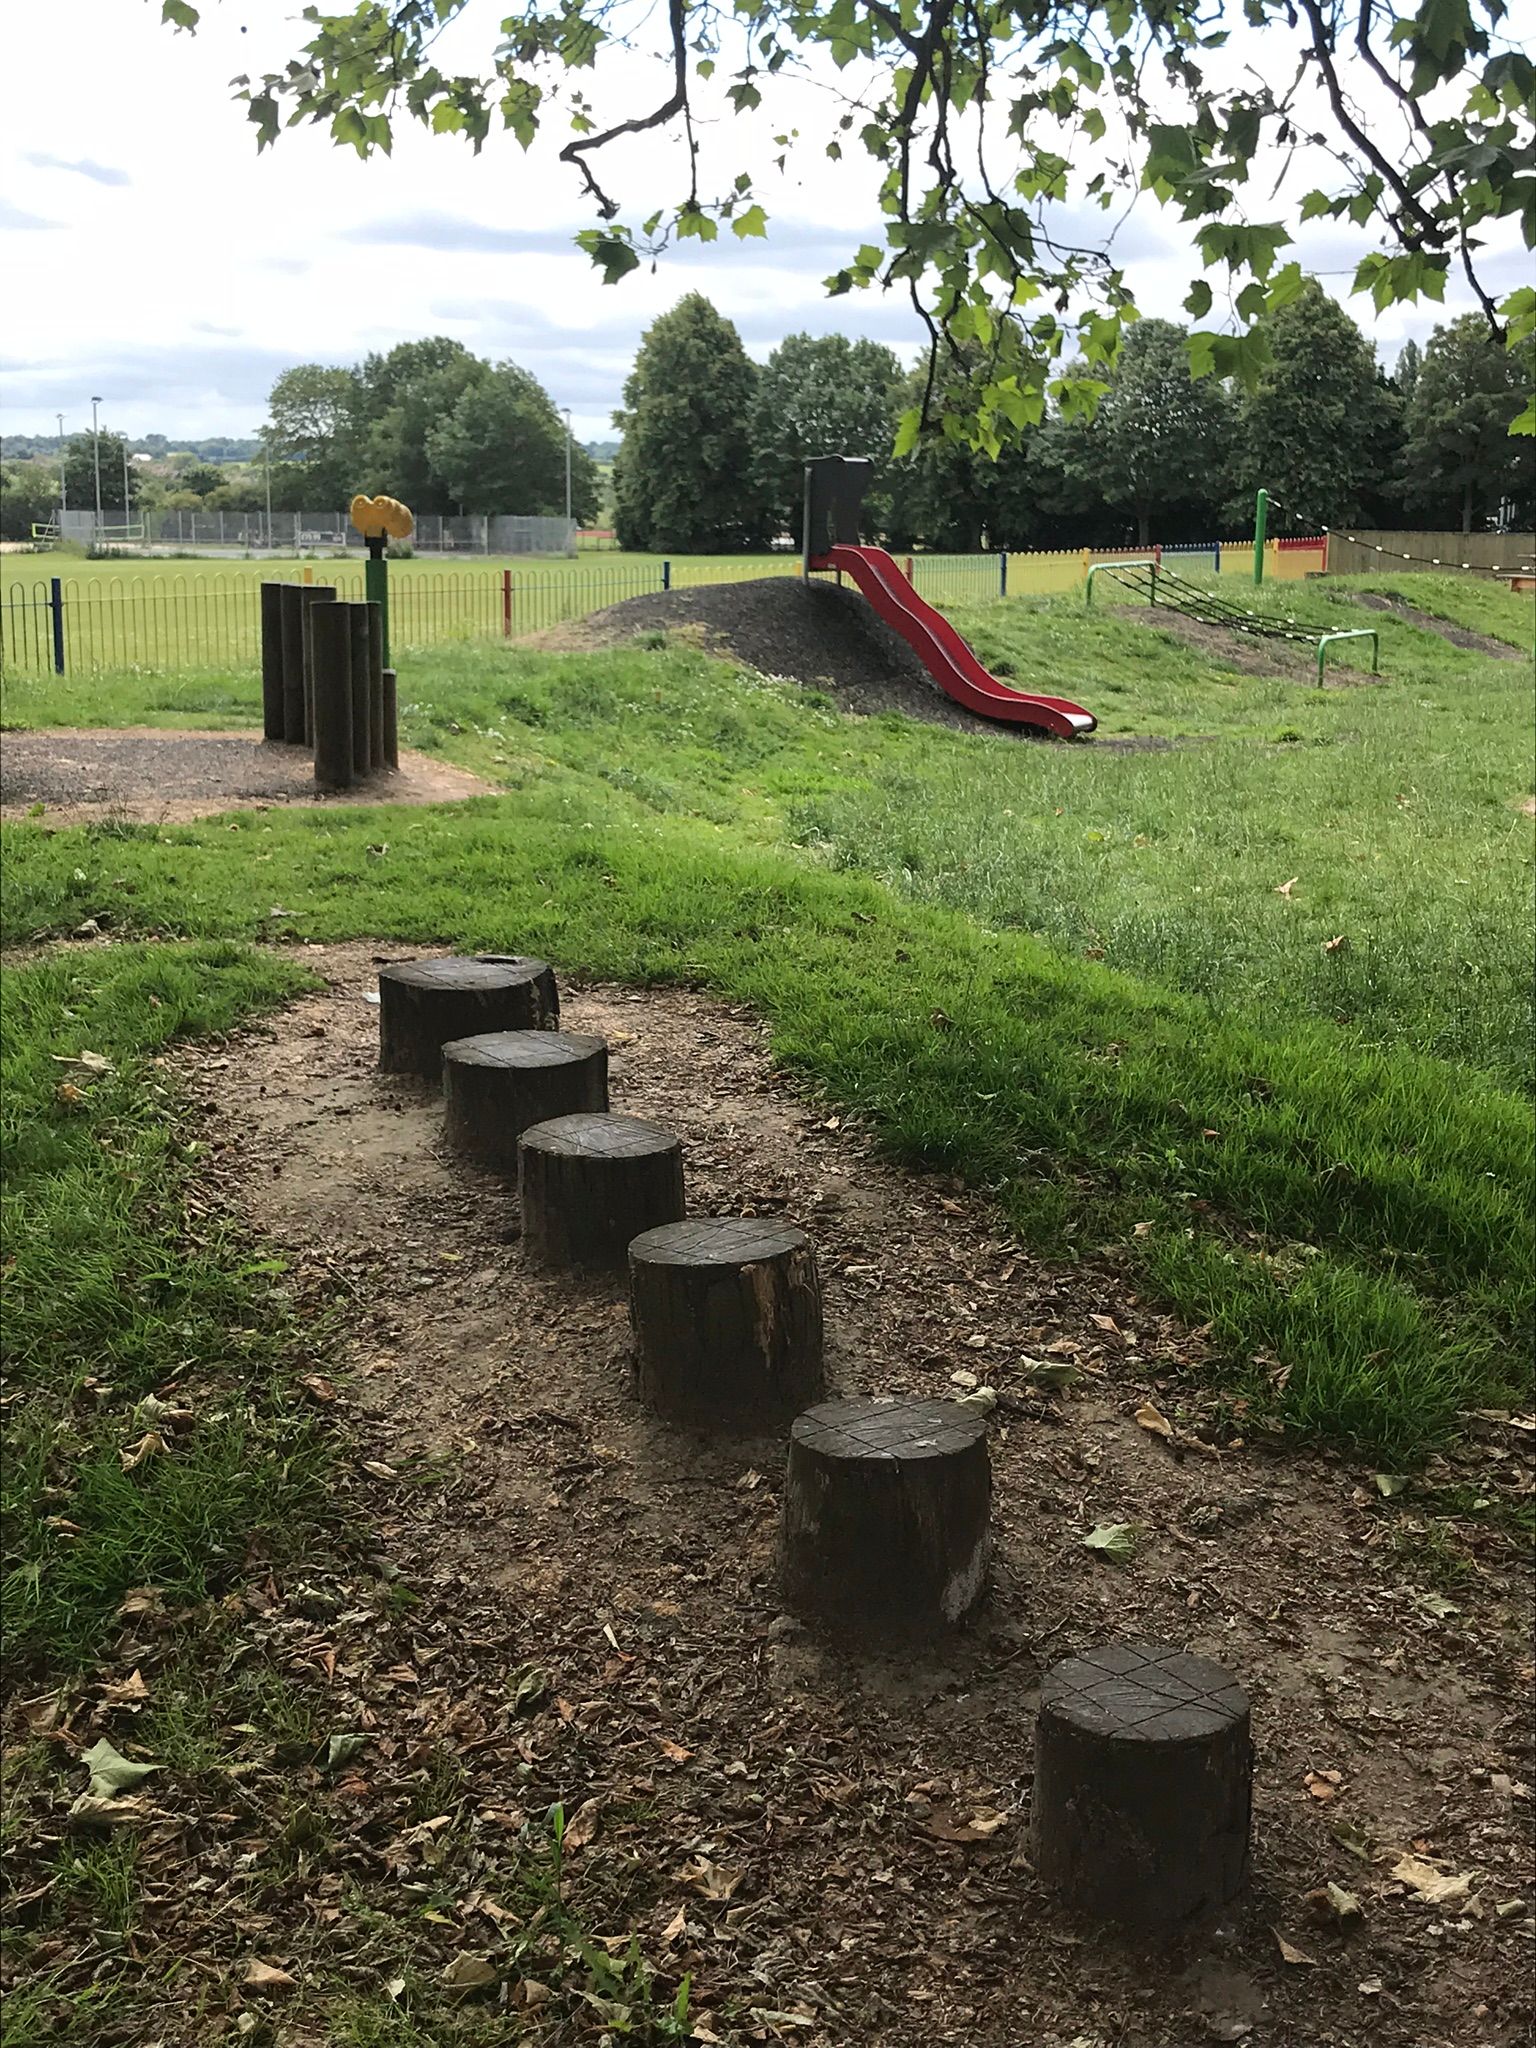 stepping stones, look out and play equipment set into the grassy bank